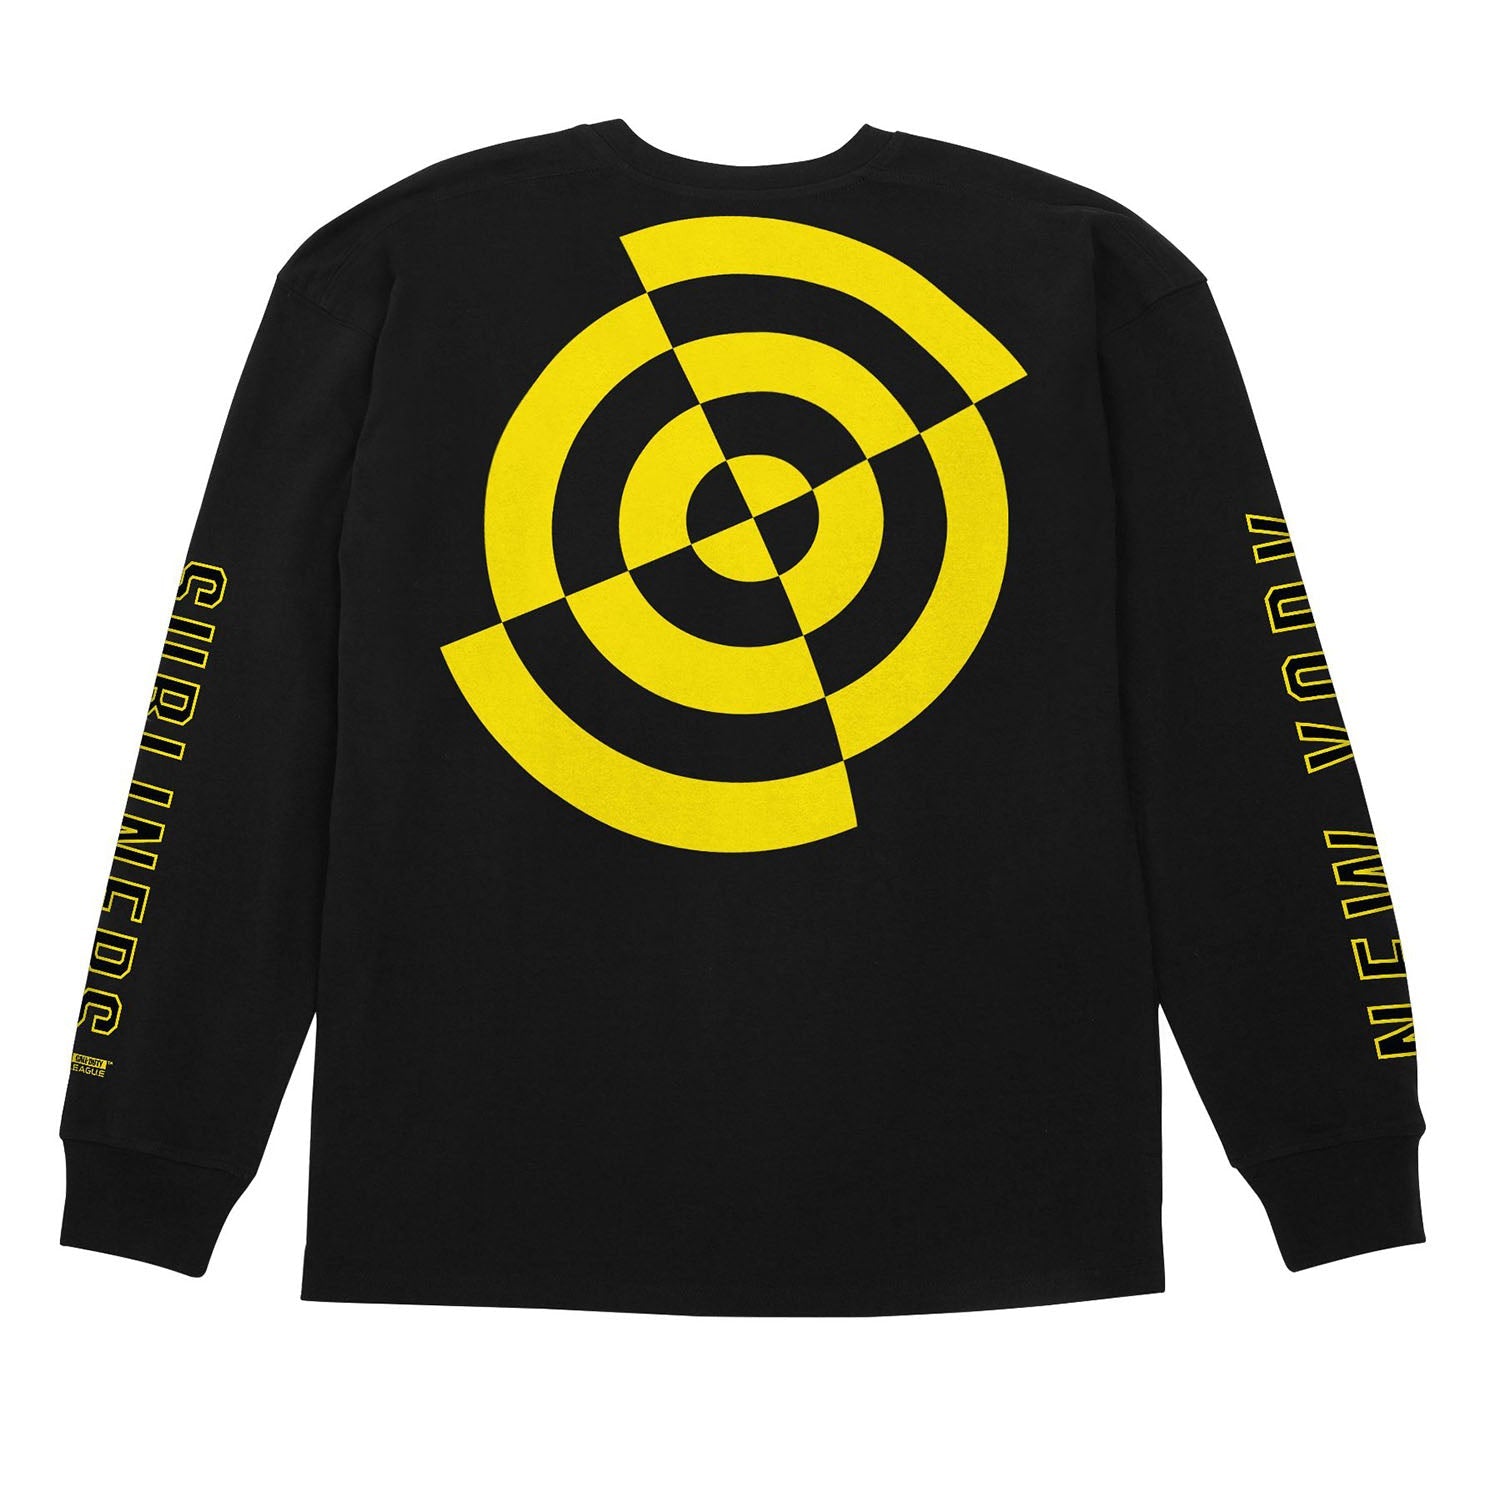 New York Subliners Black Heavyweight Long Sleeve T-Shirt- Back View